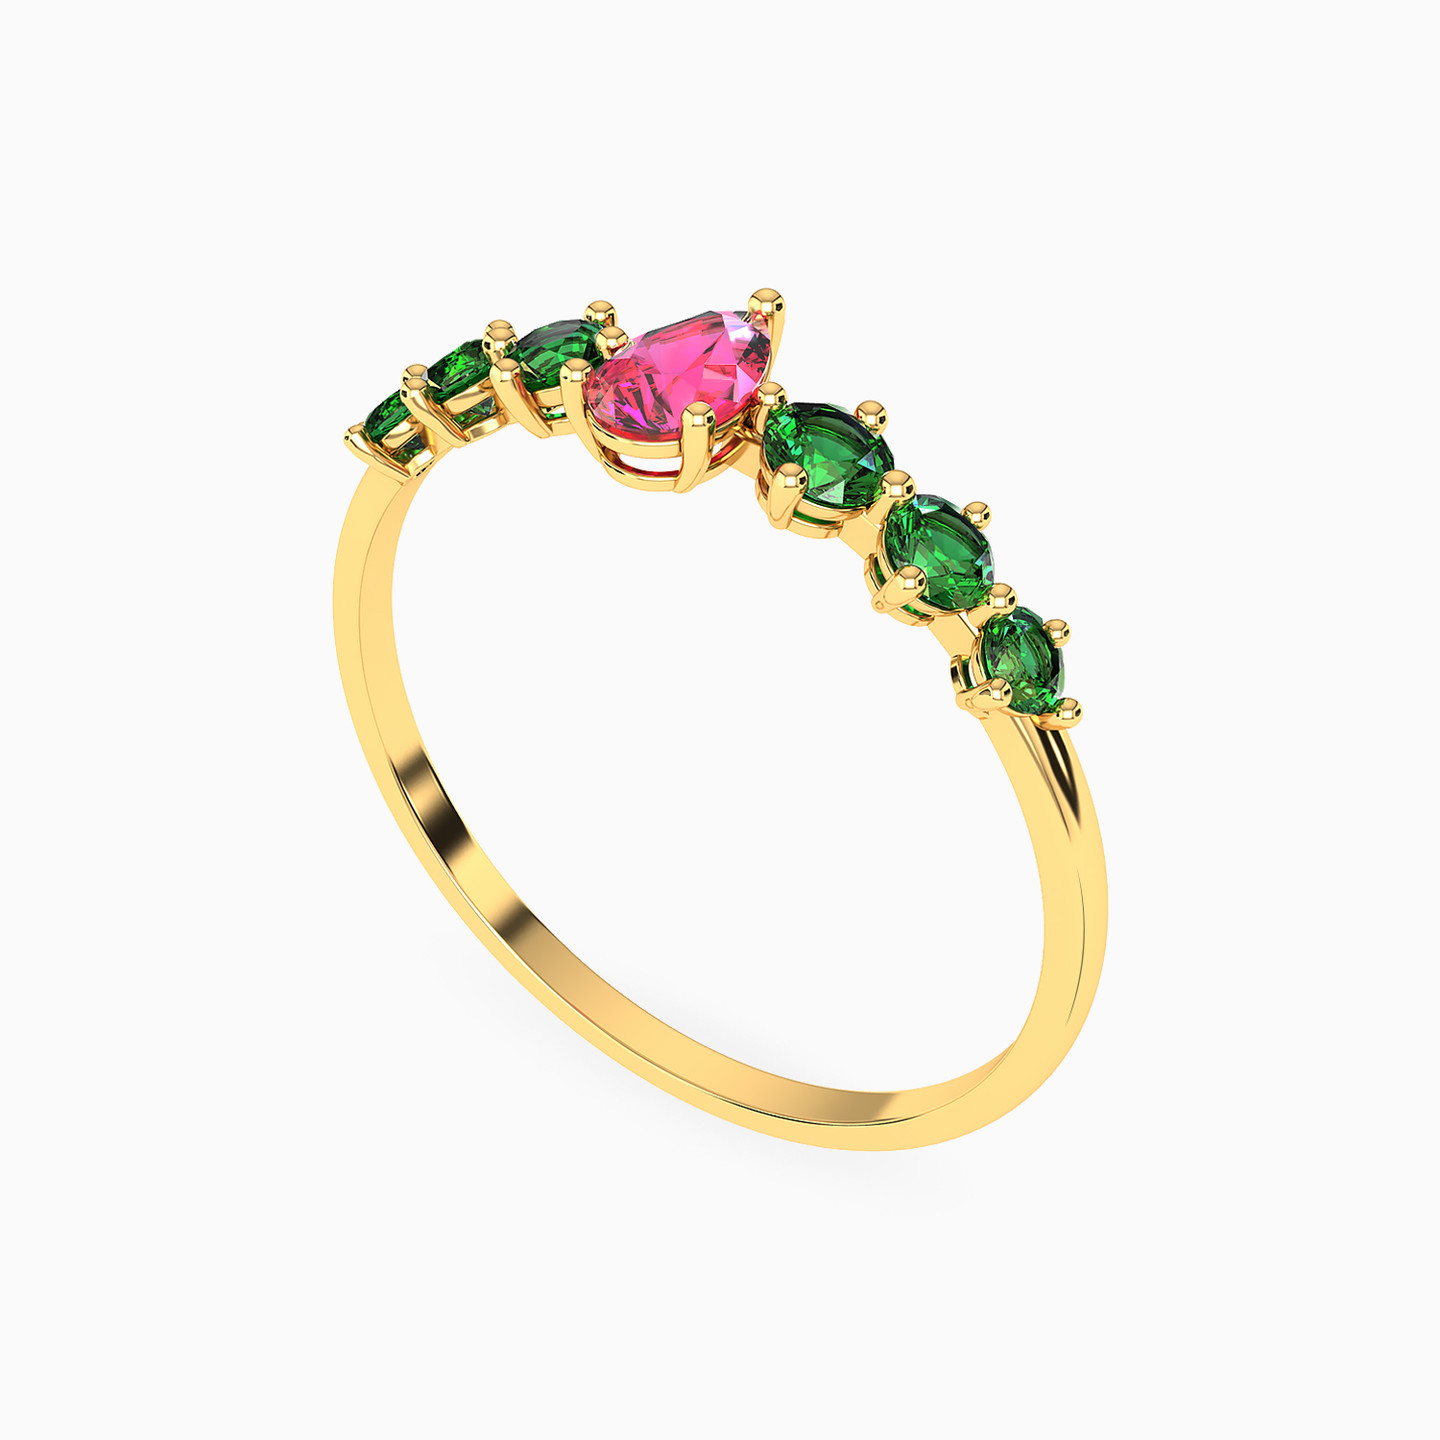 14K Gold Colored Stones Statement Ring - 2